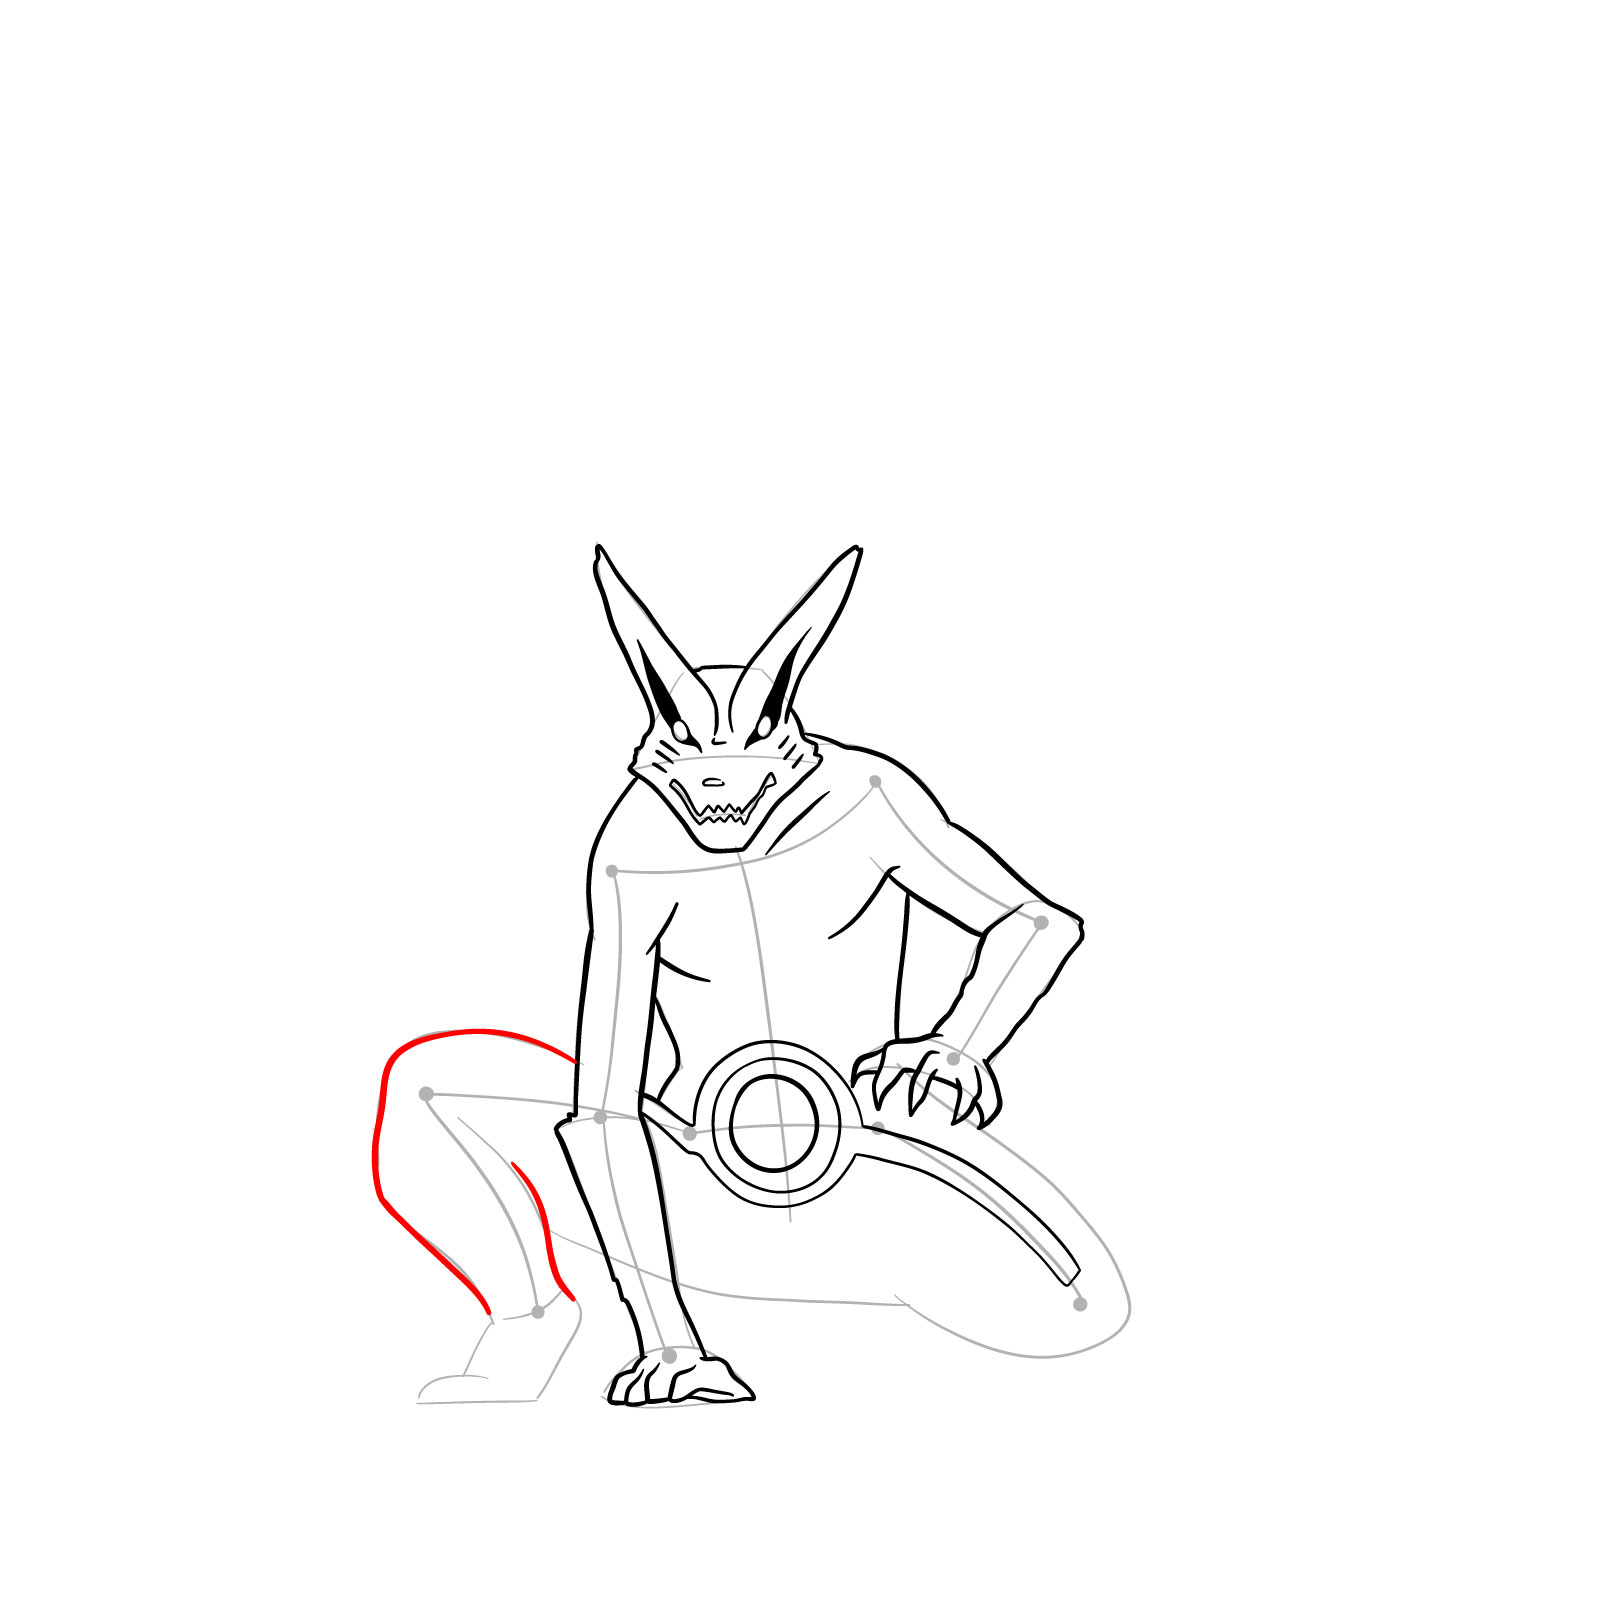 How to Draw Naruto's Tailed Beast Mode - step 23